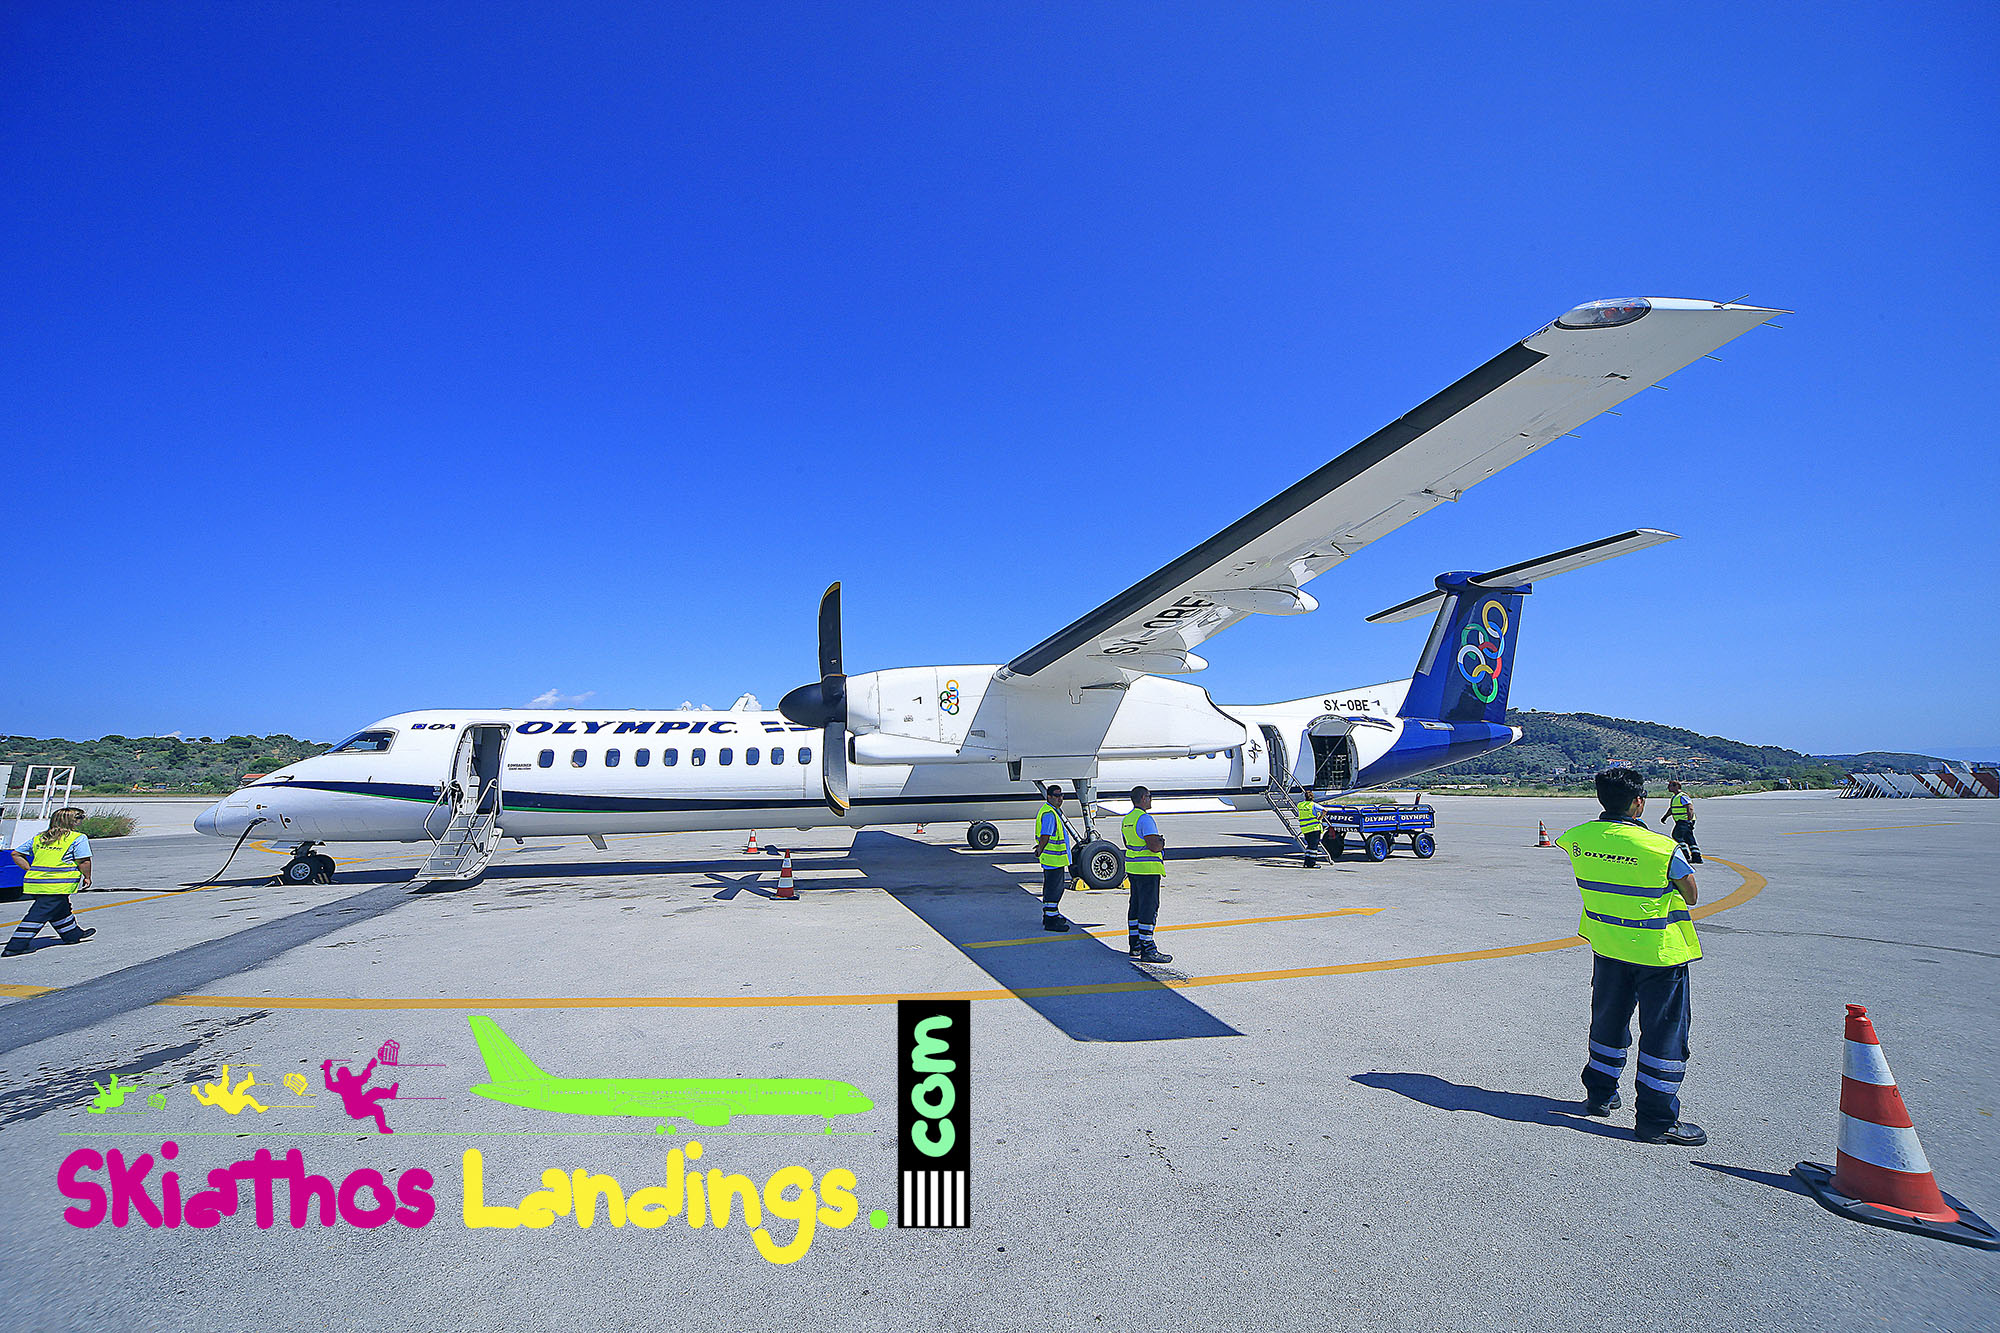 New route directly connecting Thessaloniki – Skiathios for summer 2019